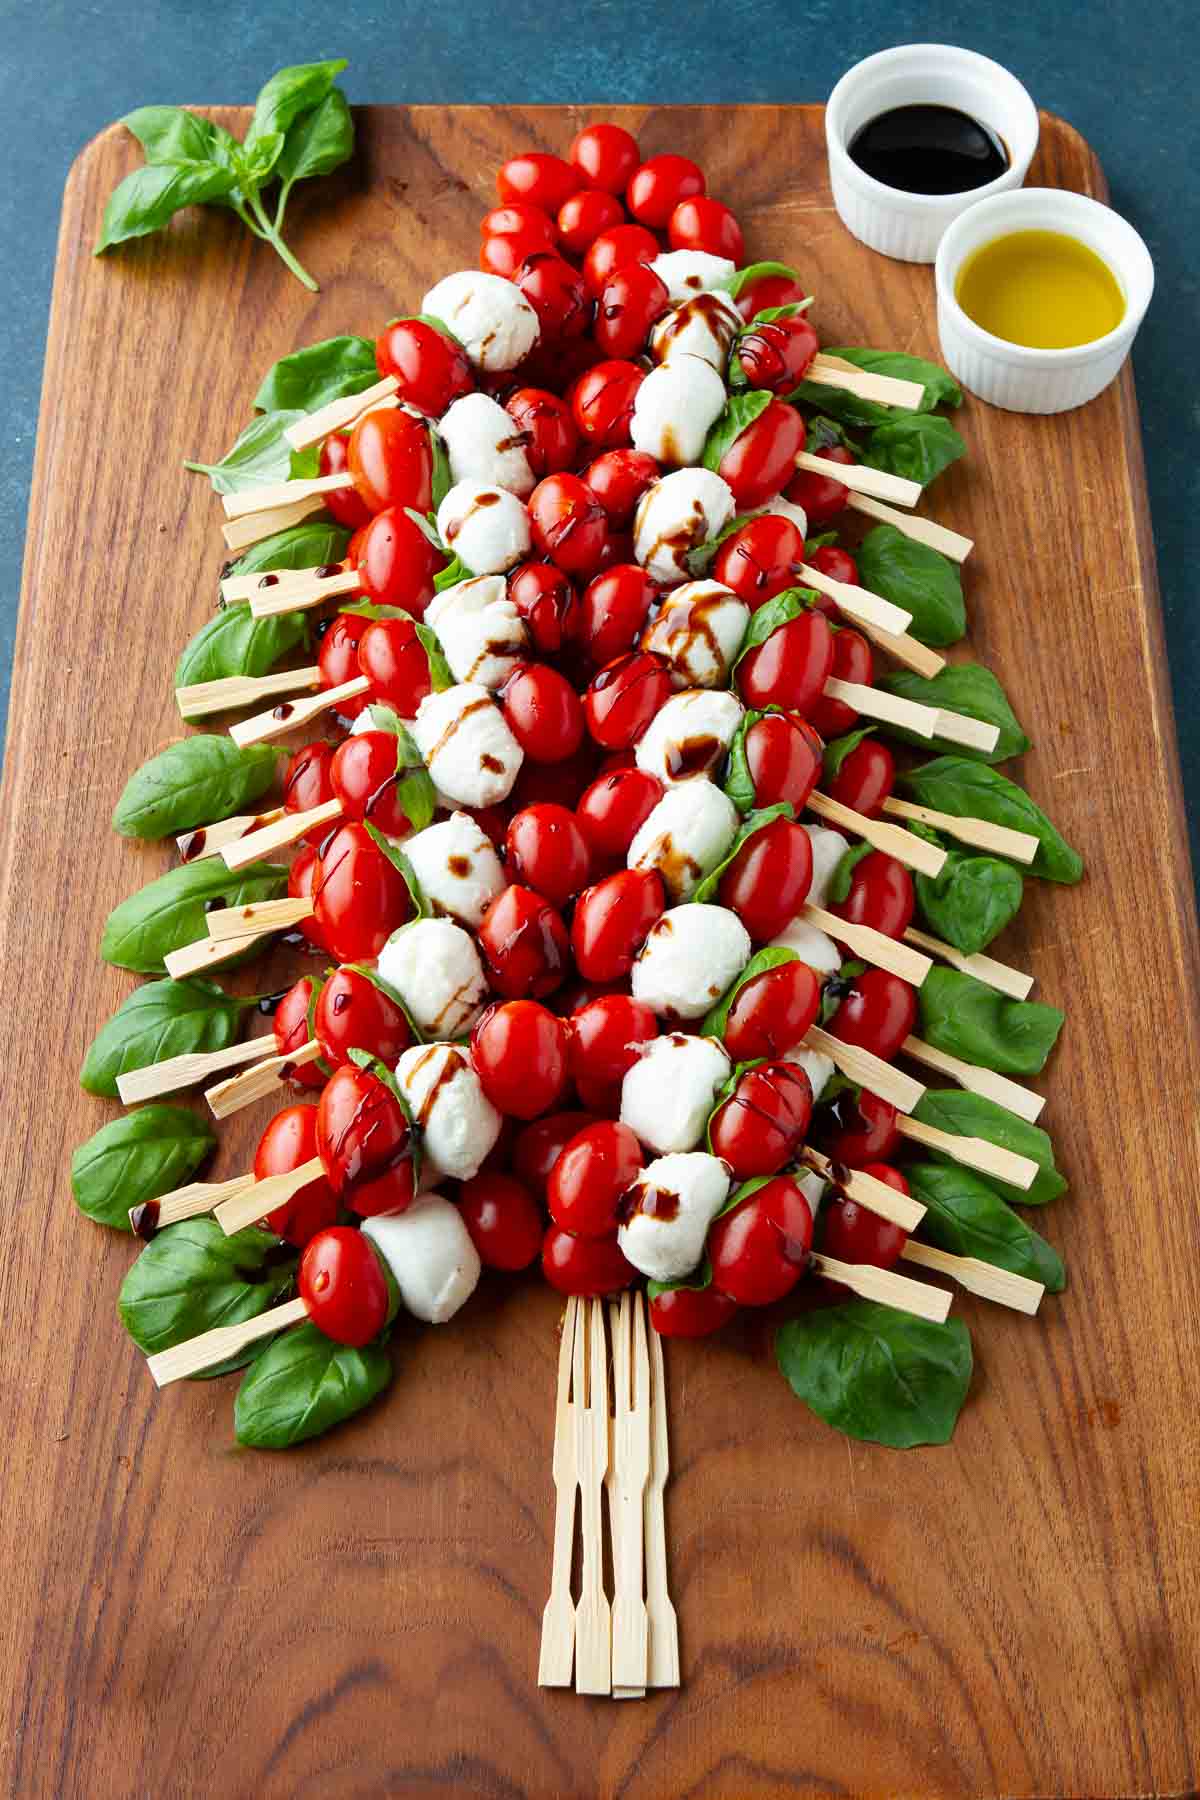 A Christmas tree formed out of tomato and mozzarella skewers on a wooden board.